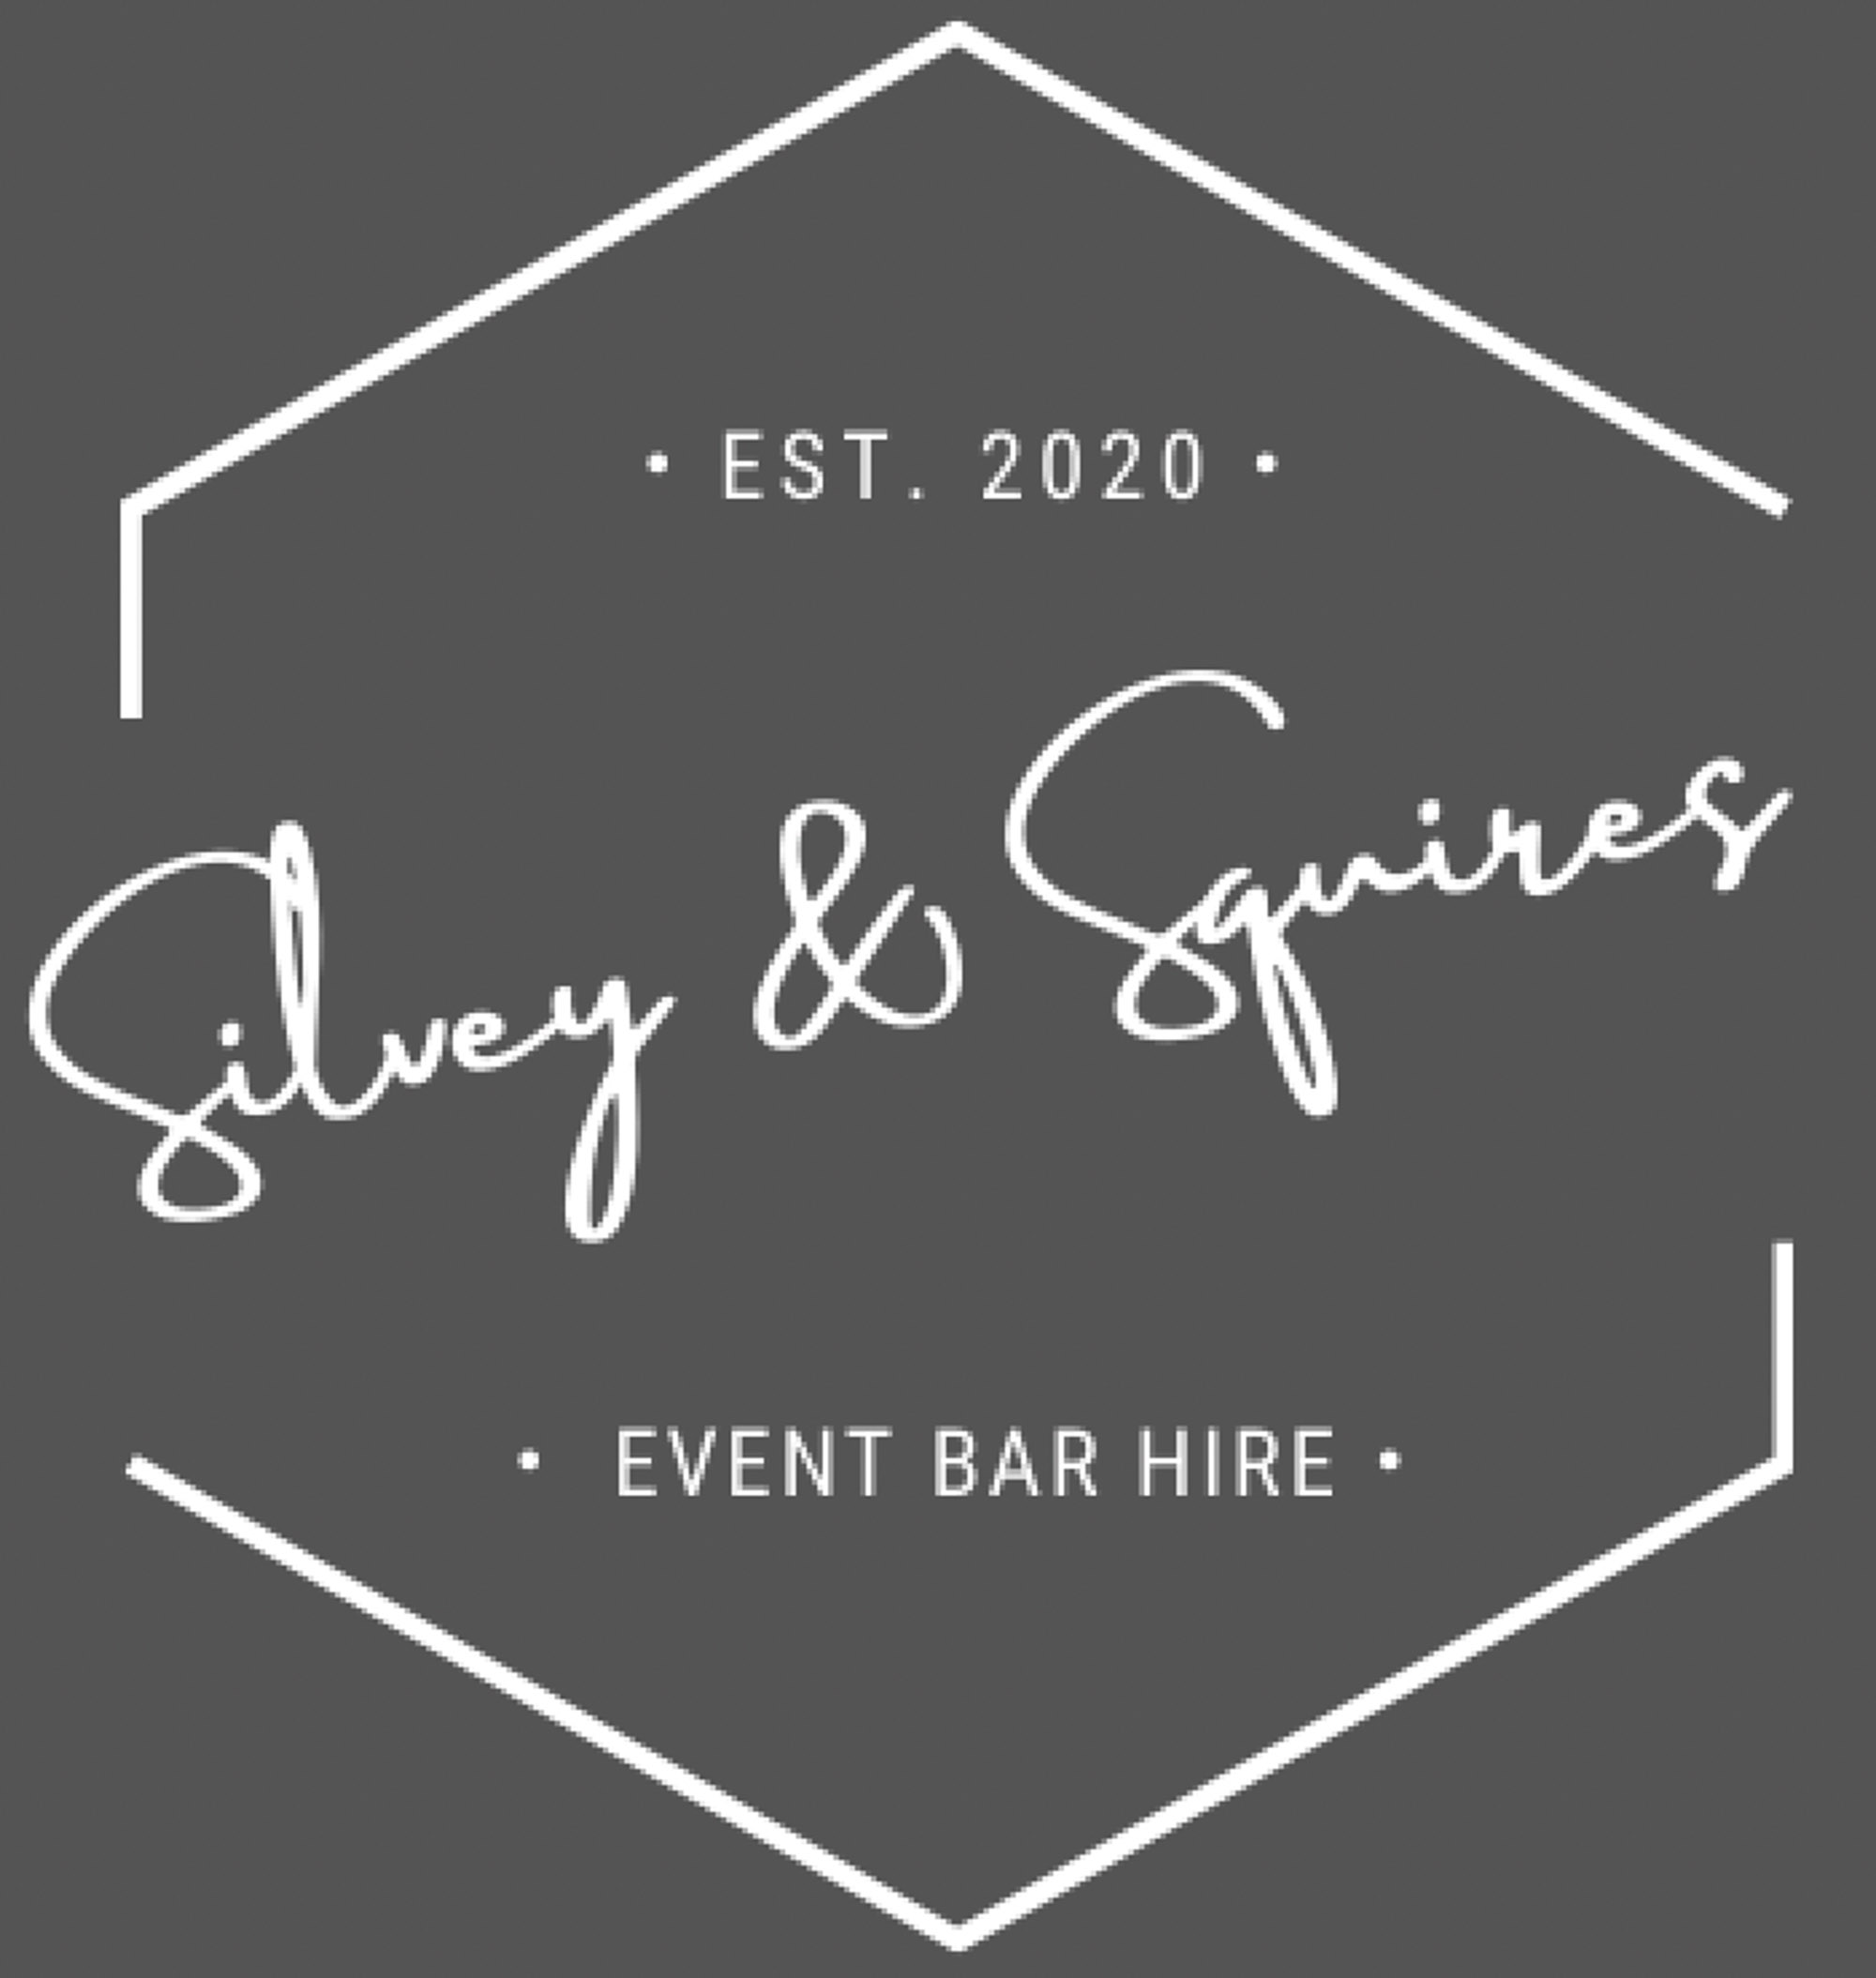 Silvey and Squires - Horsebox Mobile Bar Bedfordshire